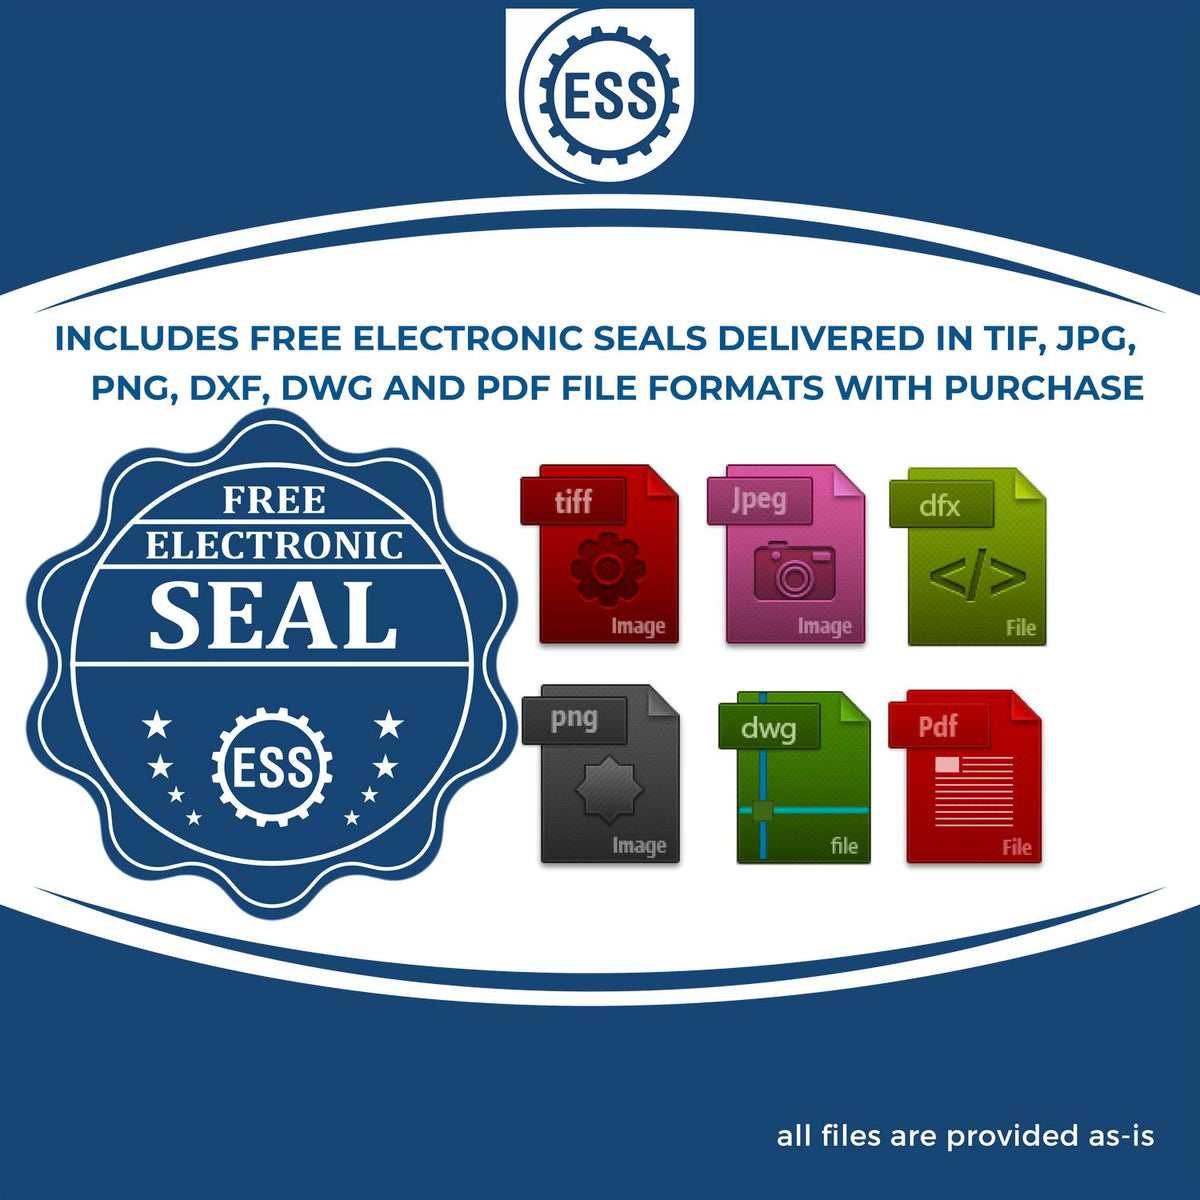 An infographic for the free electronic seal for the Hybrid Wyoming Engineer Seal illustrating the different file type icons such as DXF, DWG, TIF, JPG and PNG.